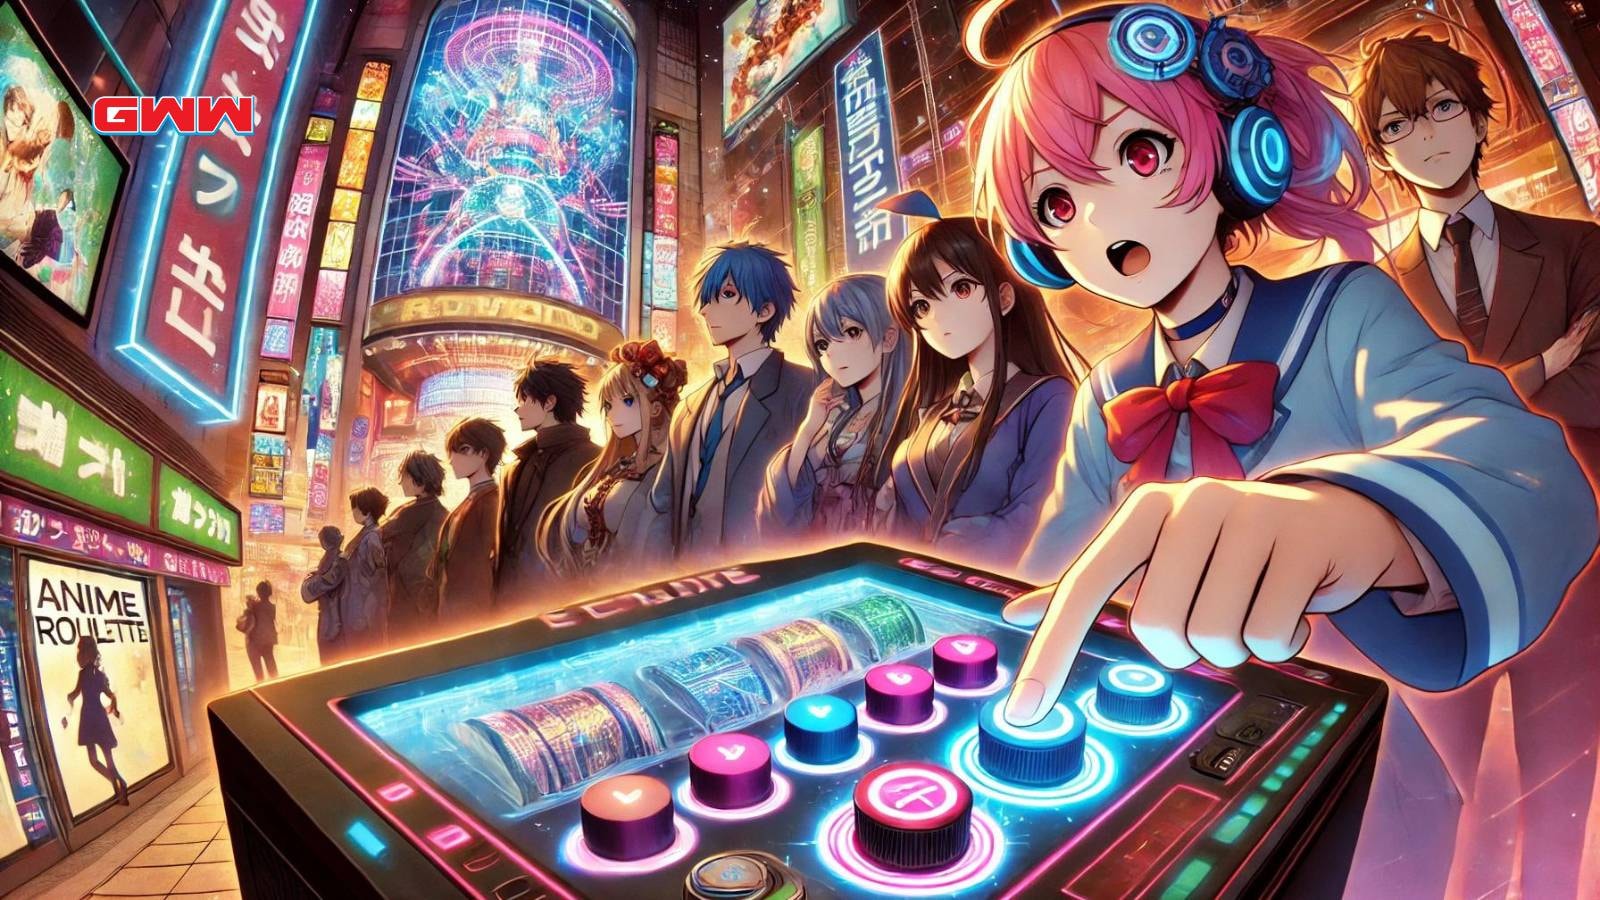 An anime-themed scene showing characters interacting with a high-tech console or device, entering a code.